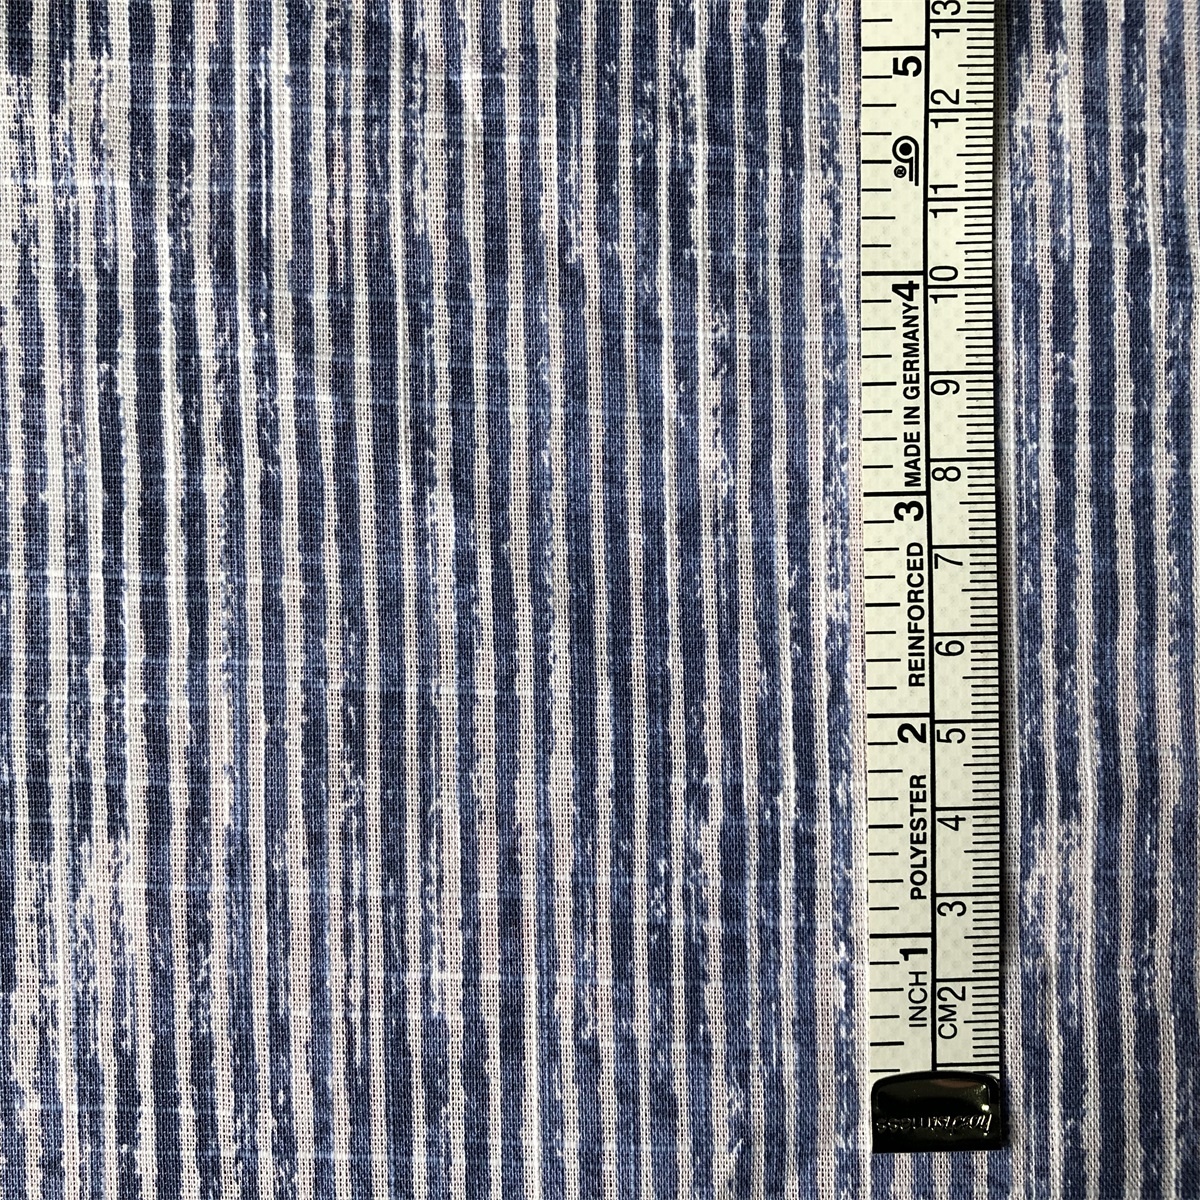 Cotton Fabric by compact yarn for men's casual shirts 100% cotton printed on yarn dyed twill slub chambray woven shirts fabric